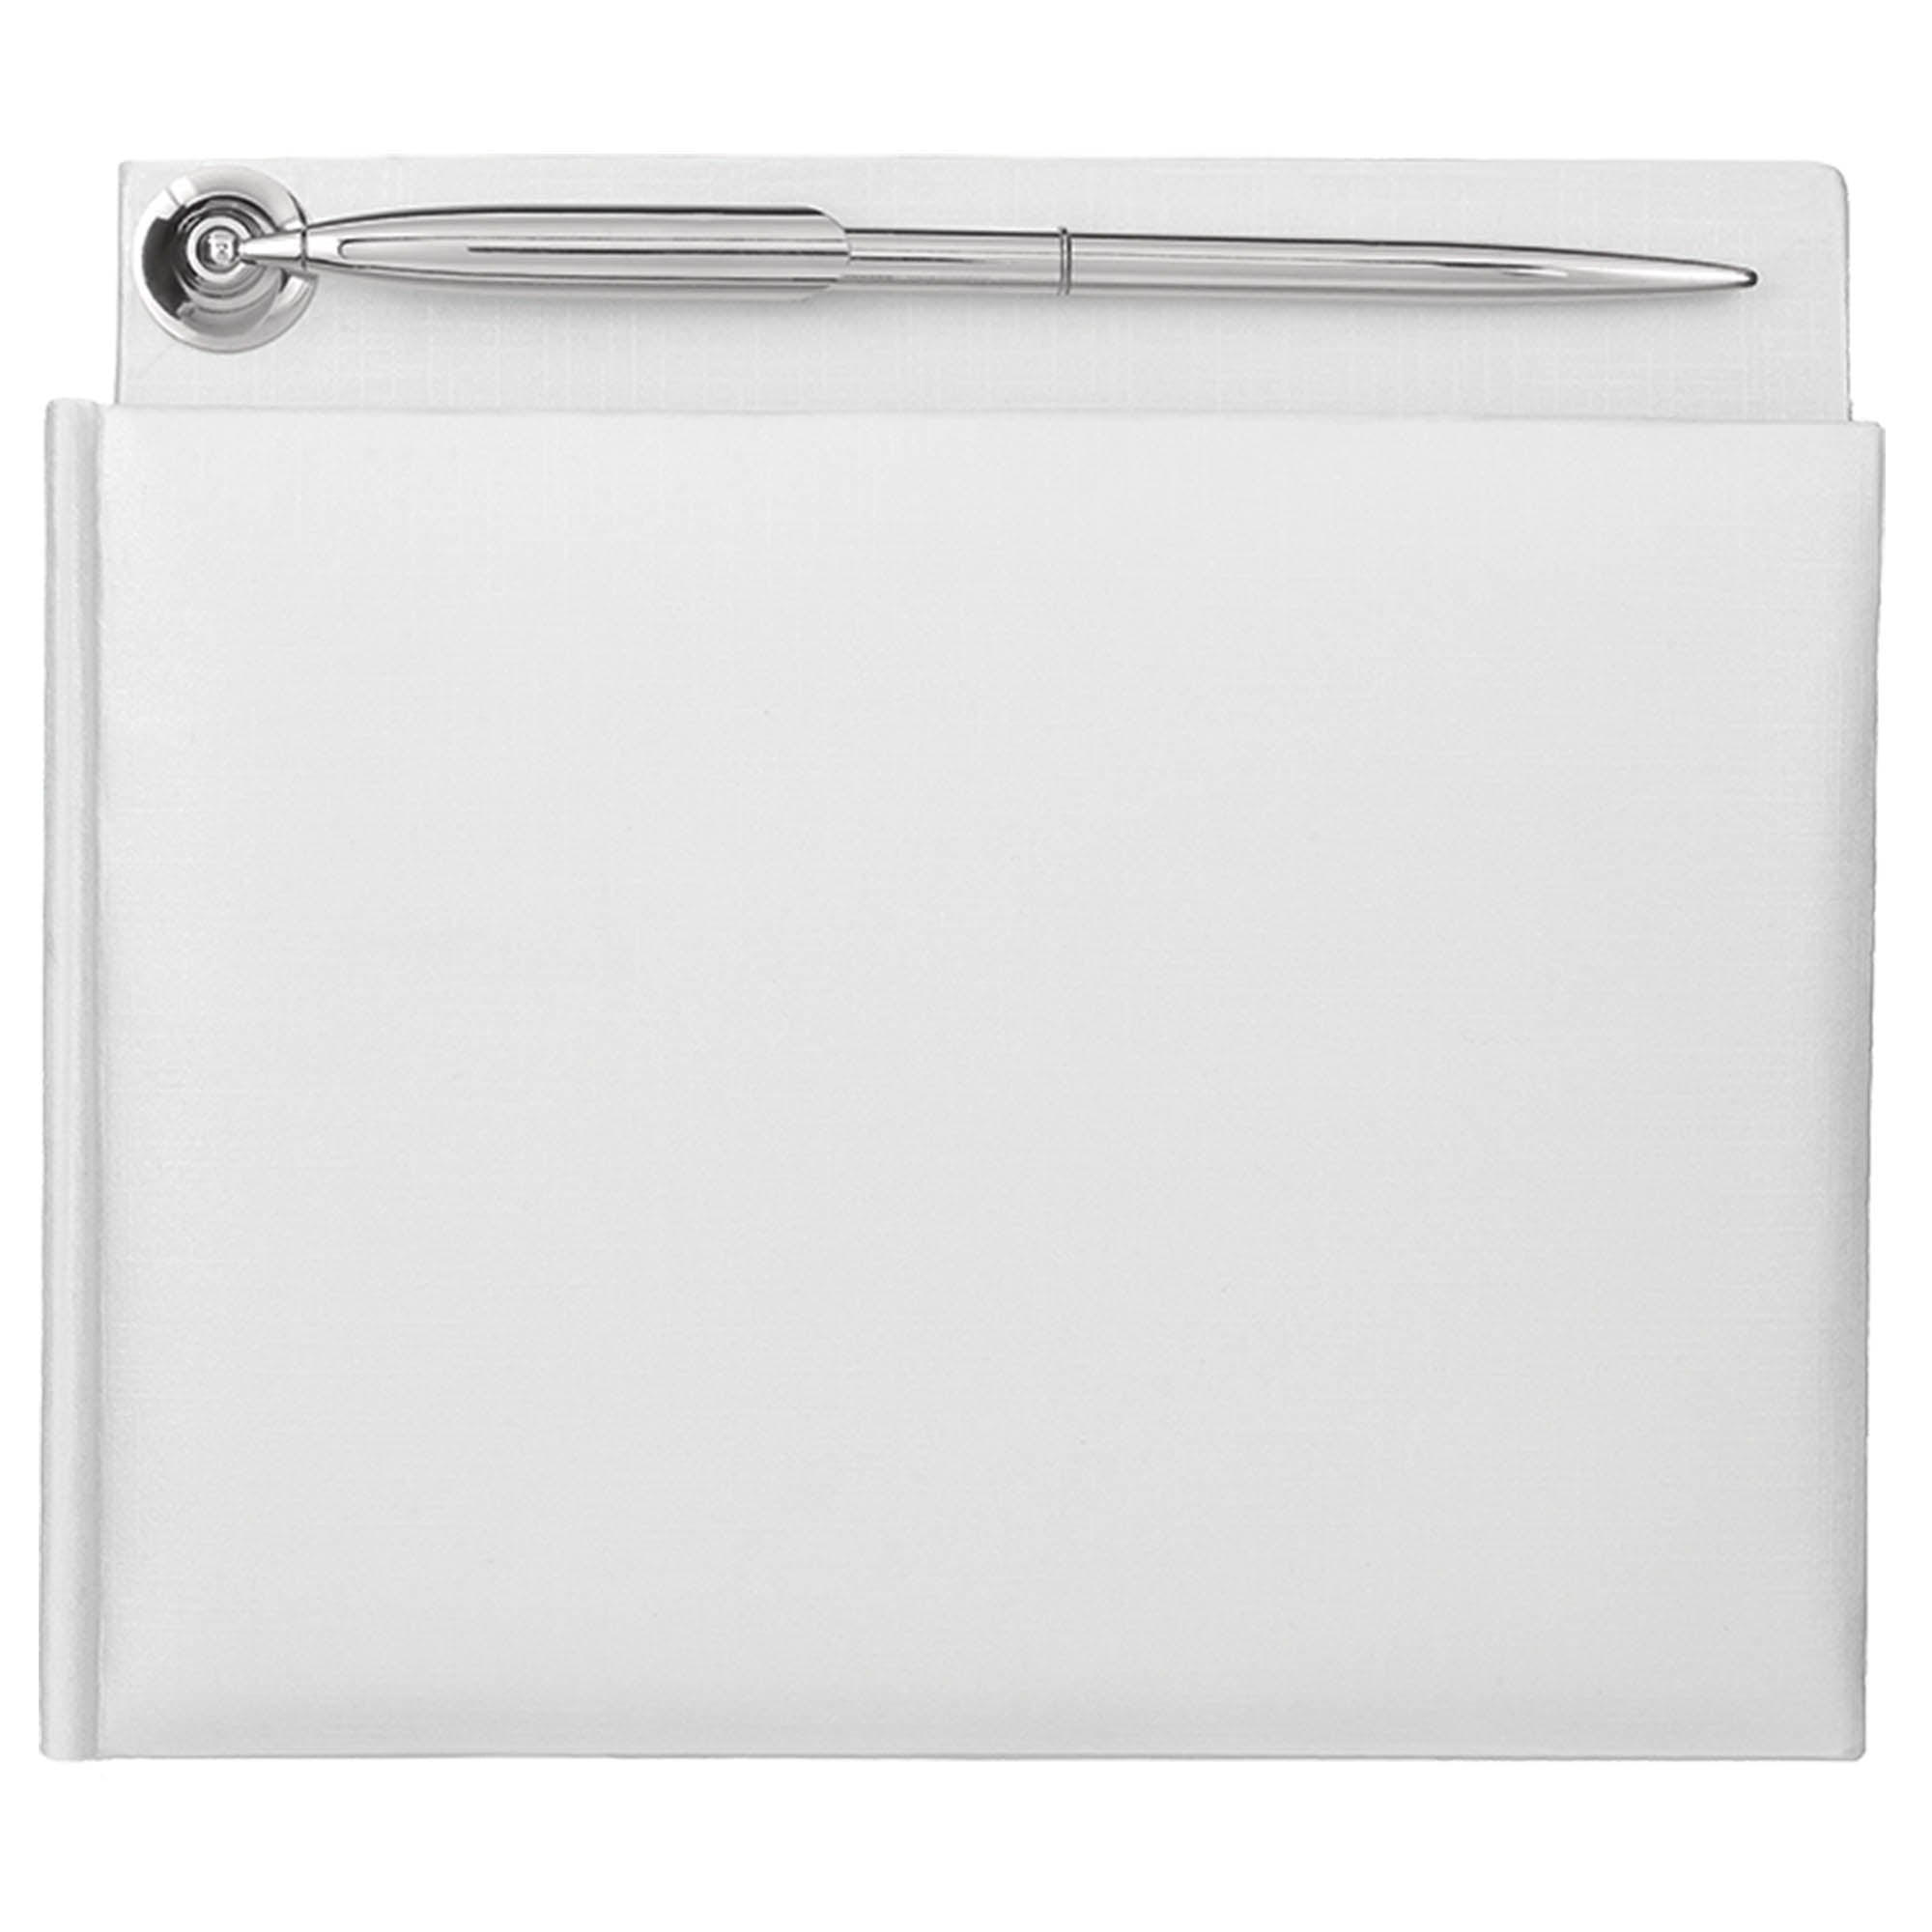 Guest Book  White Pearlized Paper Book with Pen  7.375x 8.125in